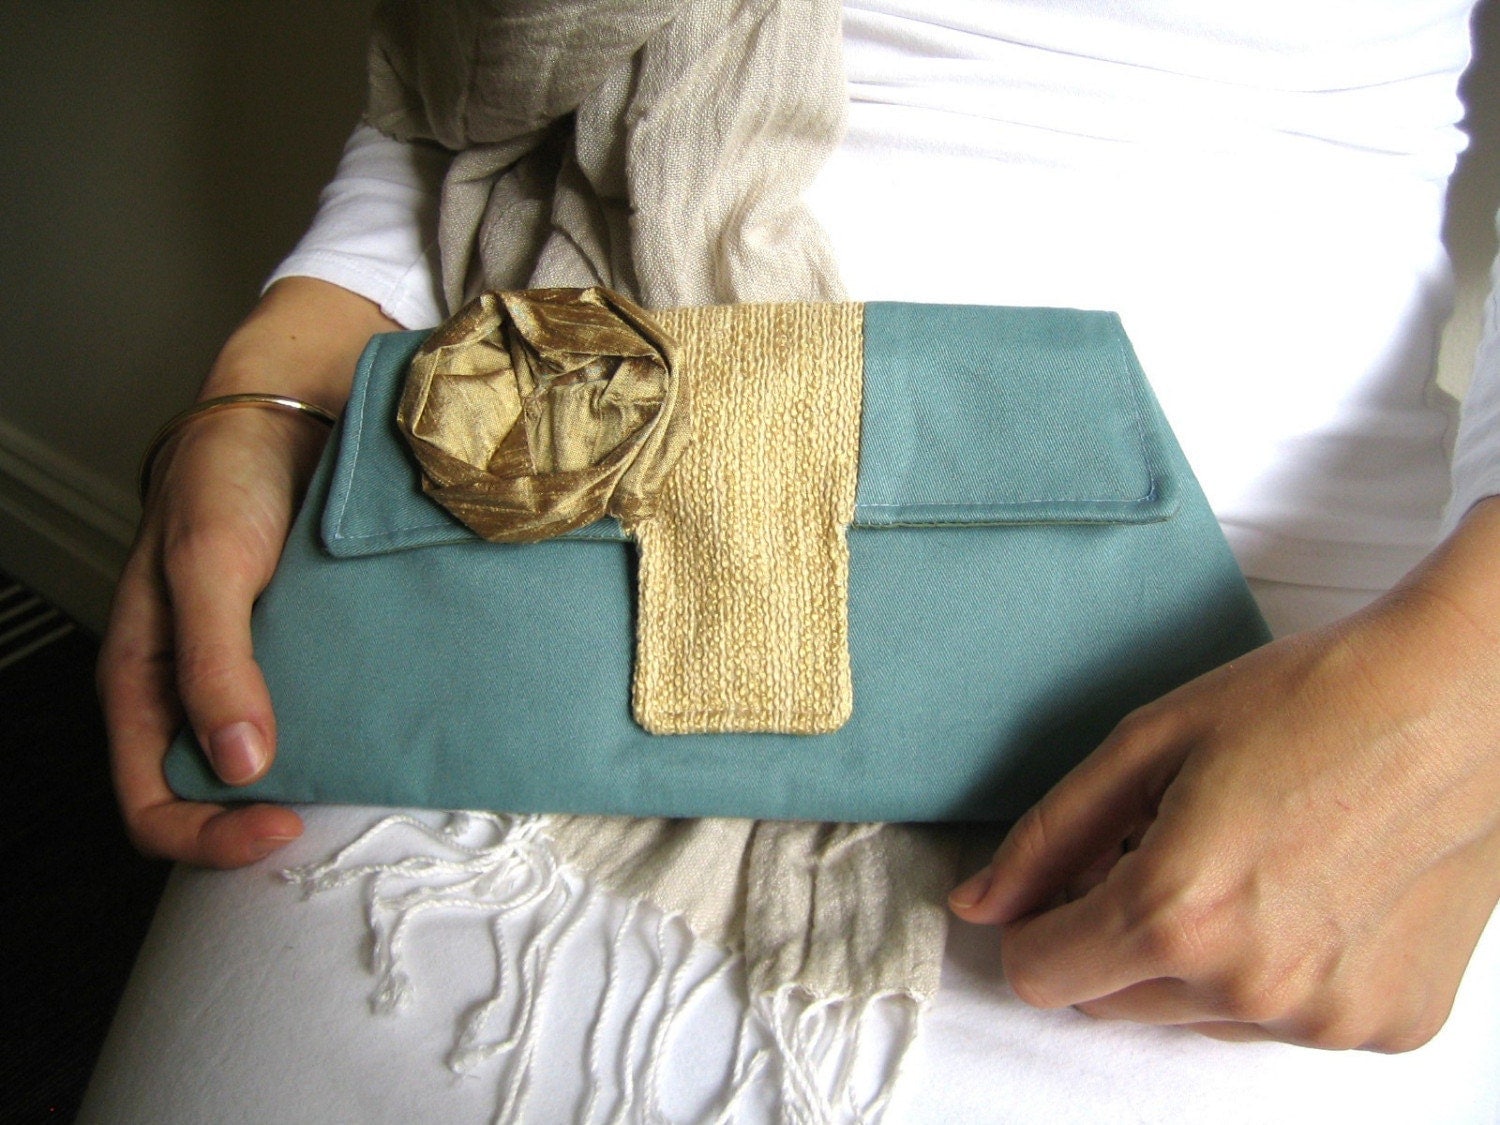 The Jacqueline Clutch in Teal and Gold